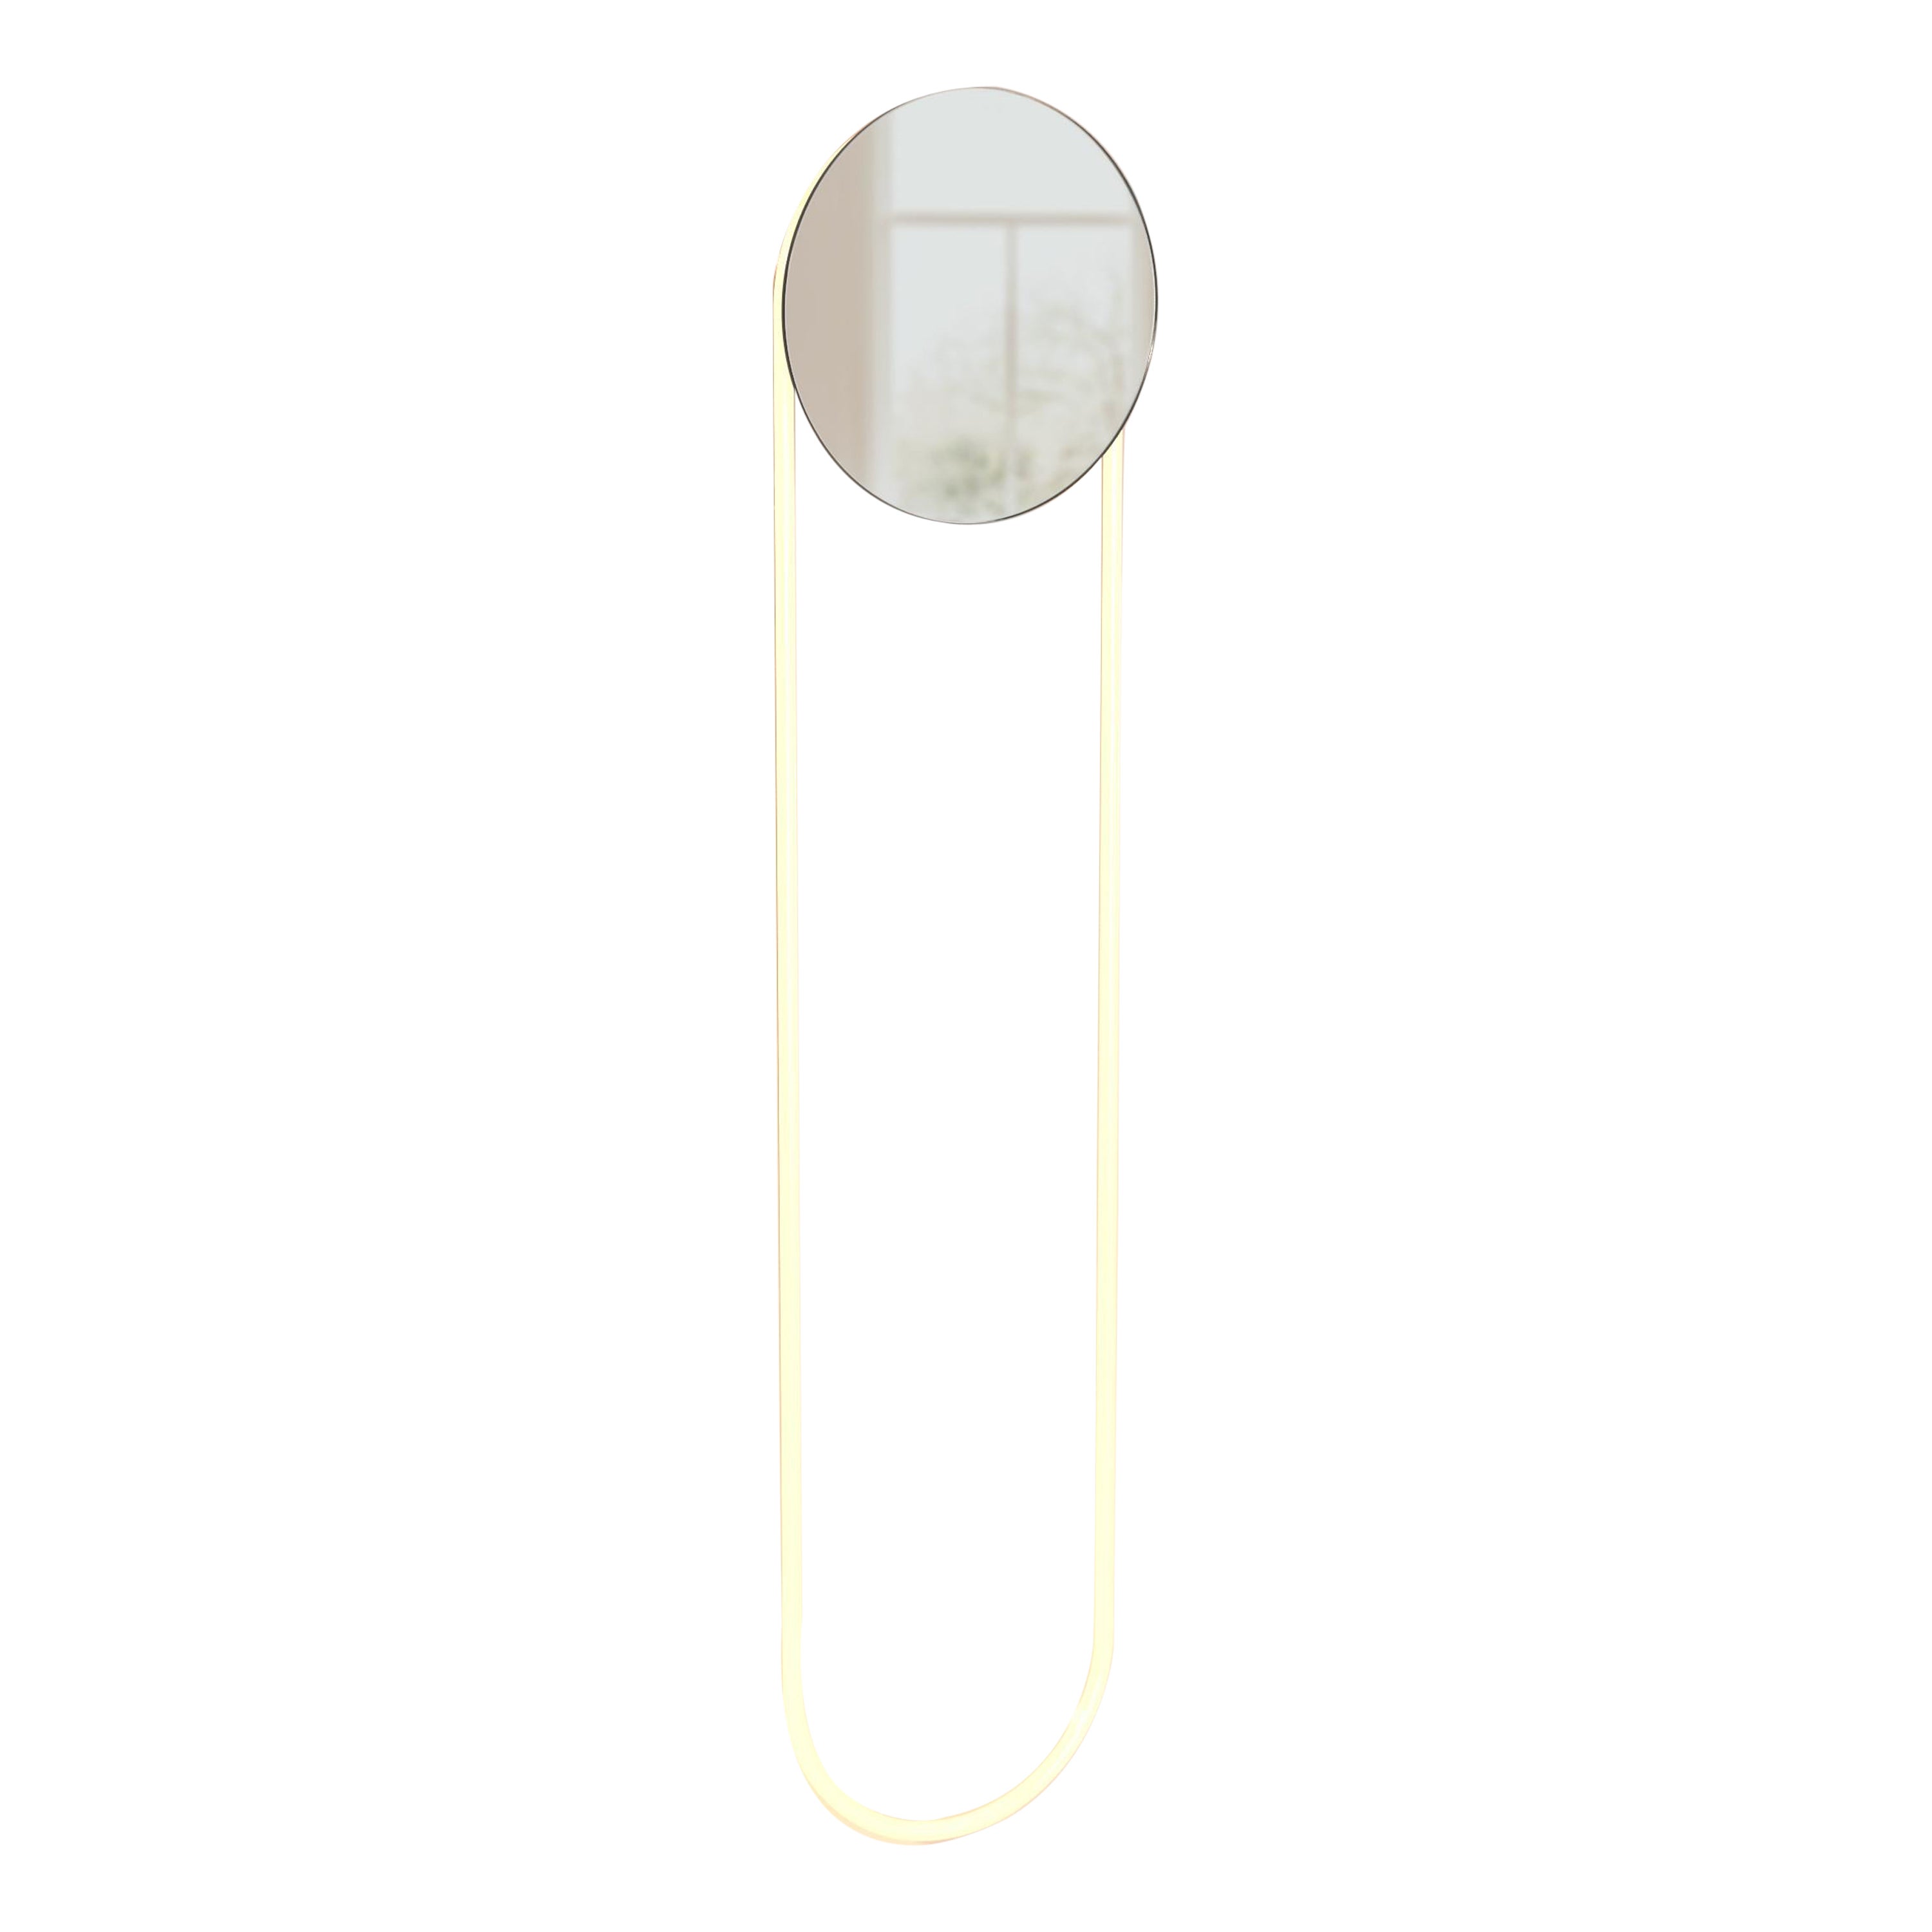 Ra Wall Mirror Modern Hand Bent Neon Wall Sconce Lighting by Studio d'armes For Sale